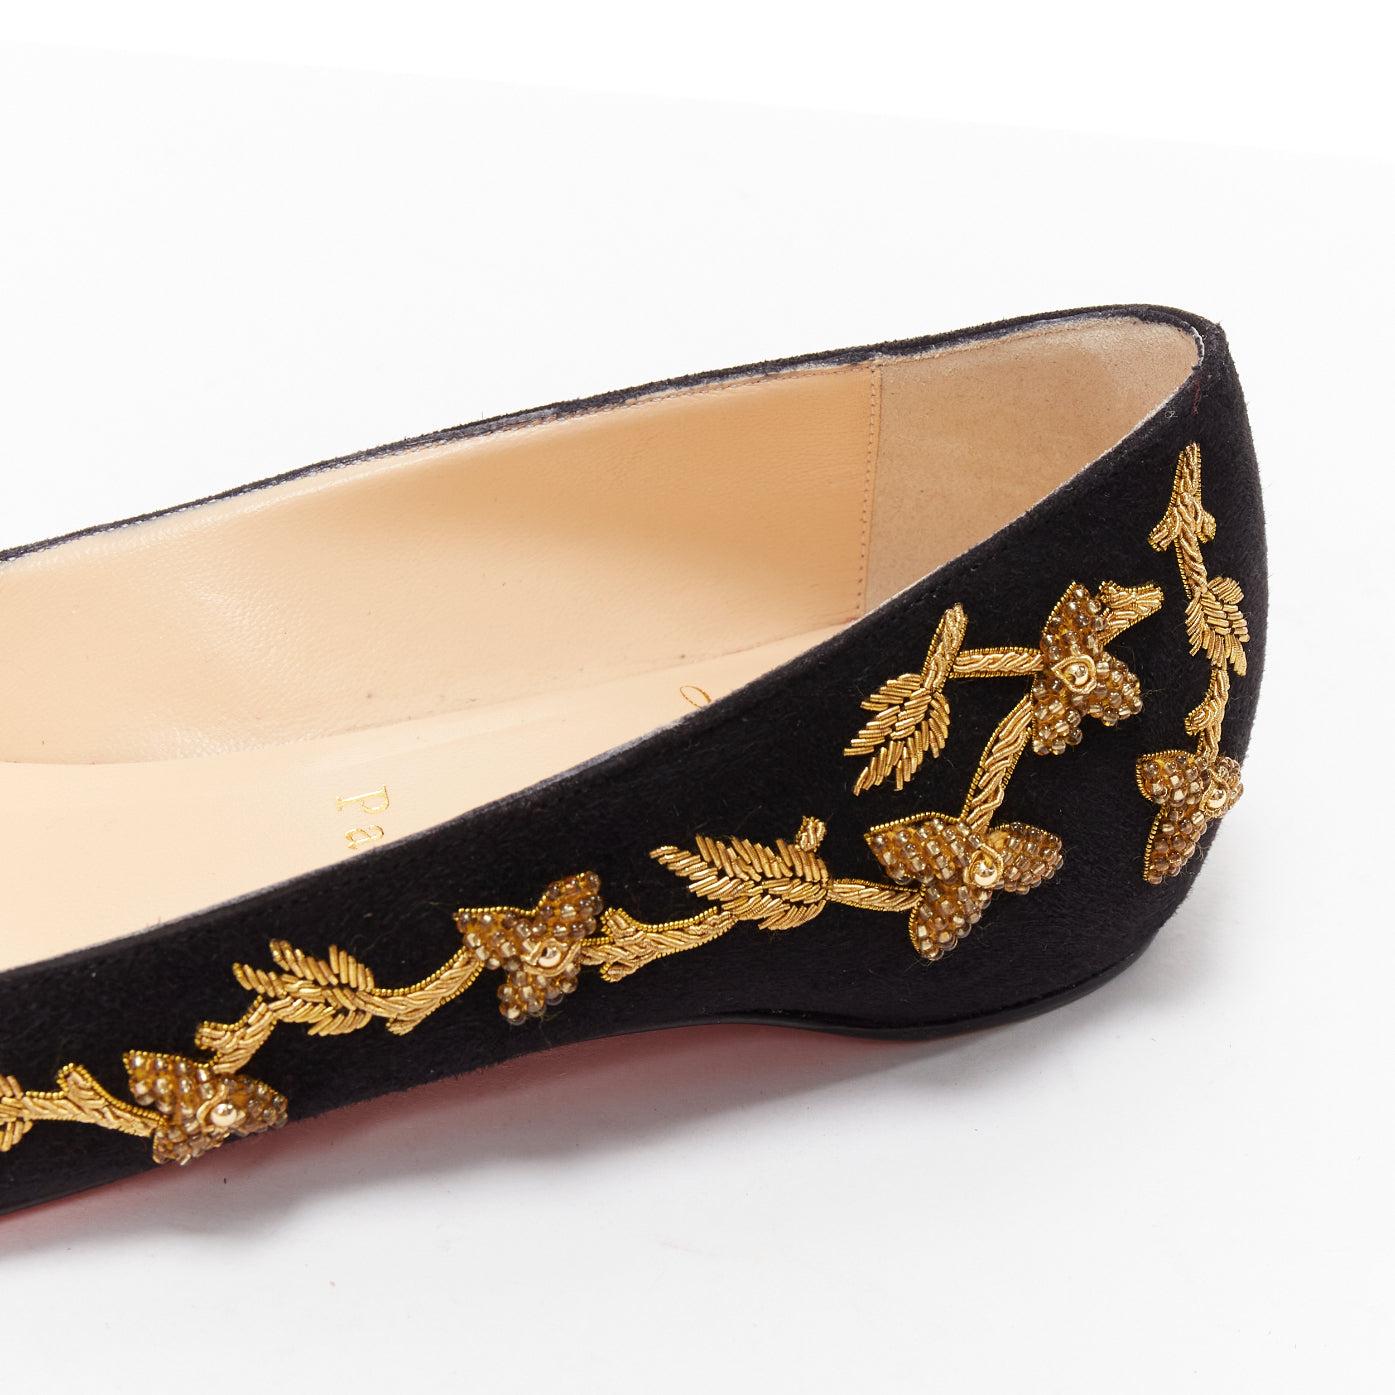 CHRISTIAN LOUBOUTIN black gold embroidery suede leather pointy flats EU35.5 For Sale 4